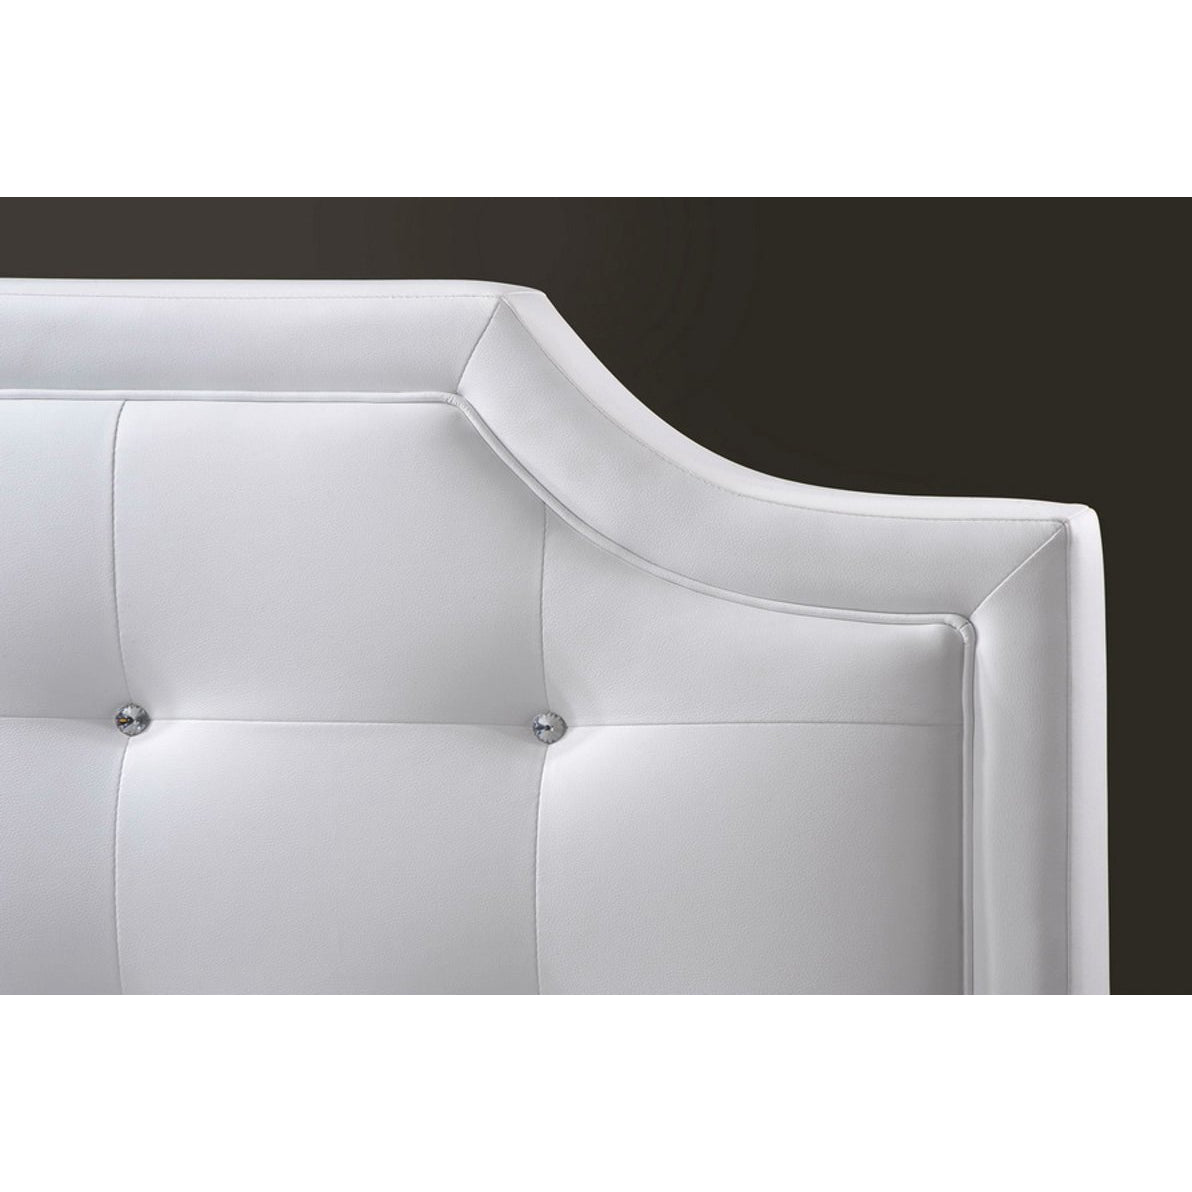 Baxton Studio Carlotta White Modern Bed with Upholstered Headboard - Queen Size Baxton Studio-beds-Minimal And Modern - 3